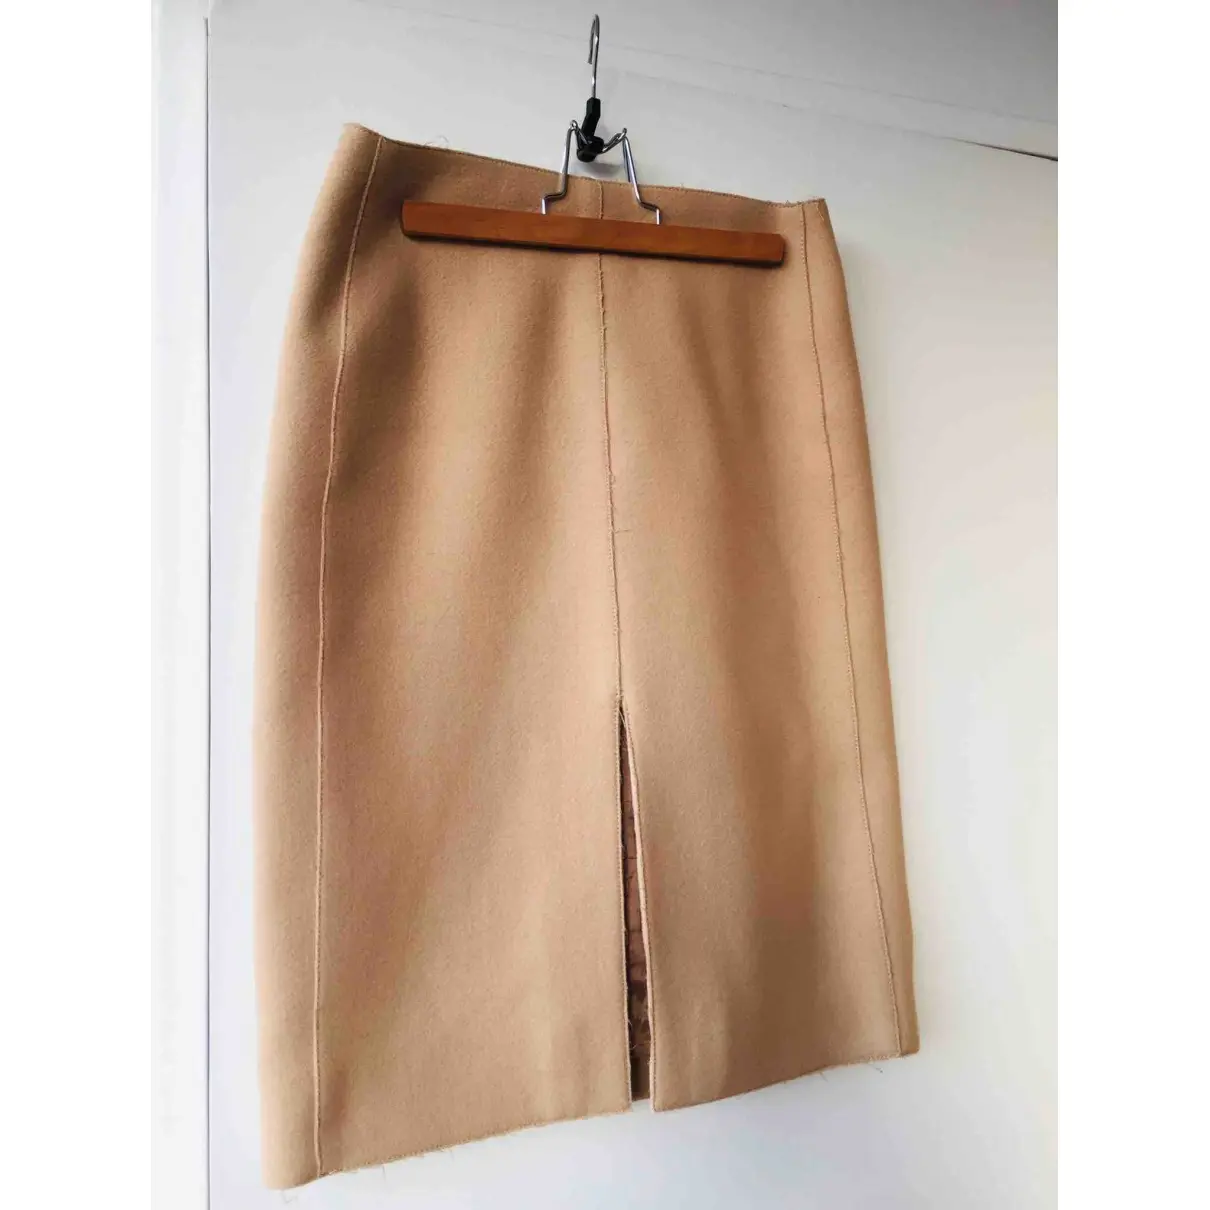 Carven Wool skirt suit for sale